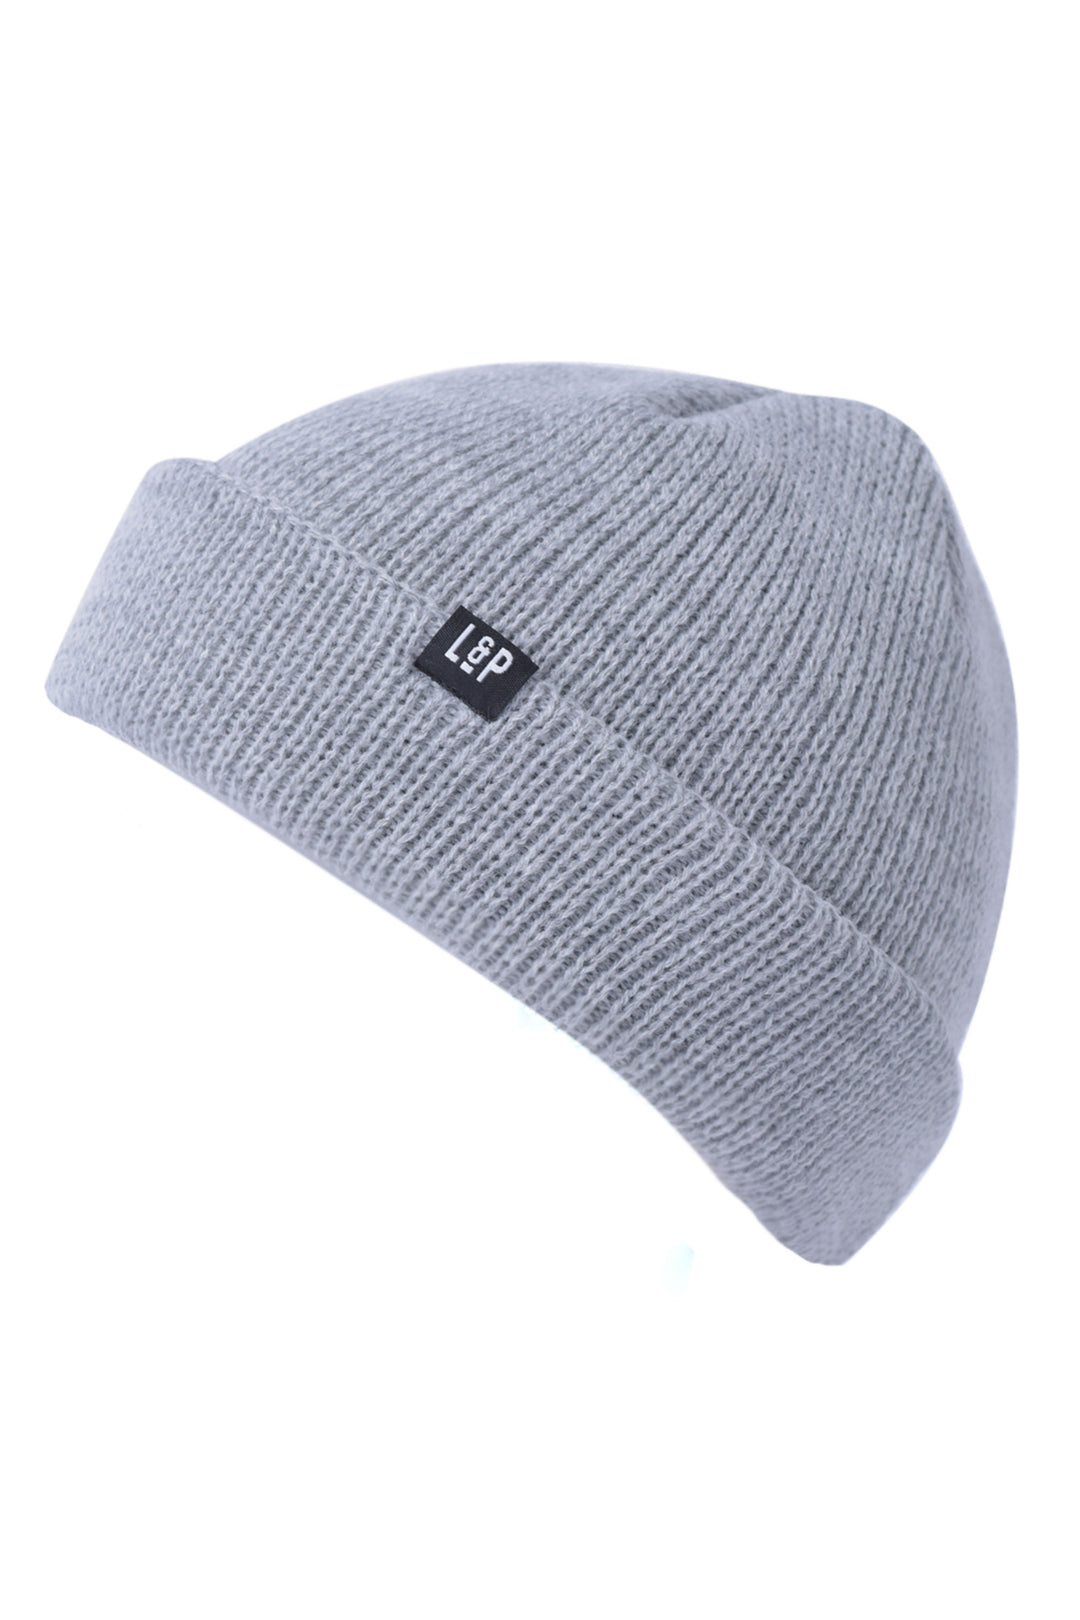 2-in-1 knit toque [New York '23 series]